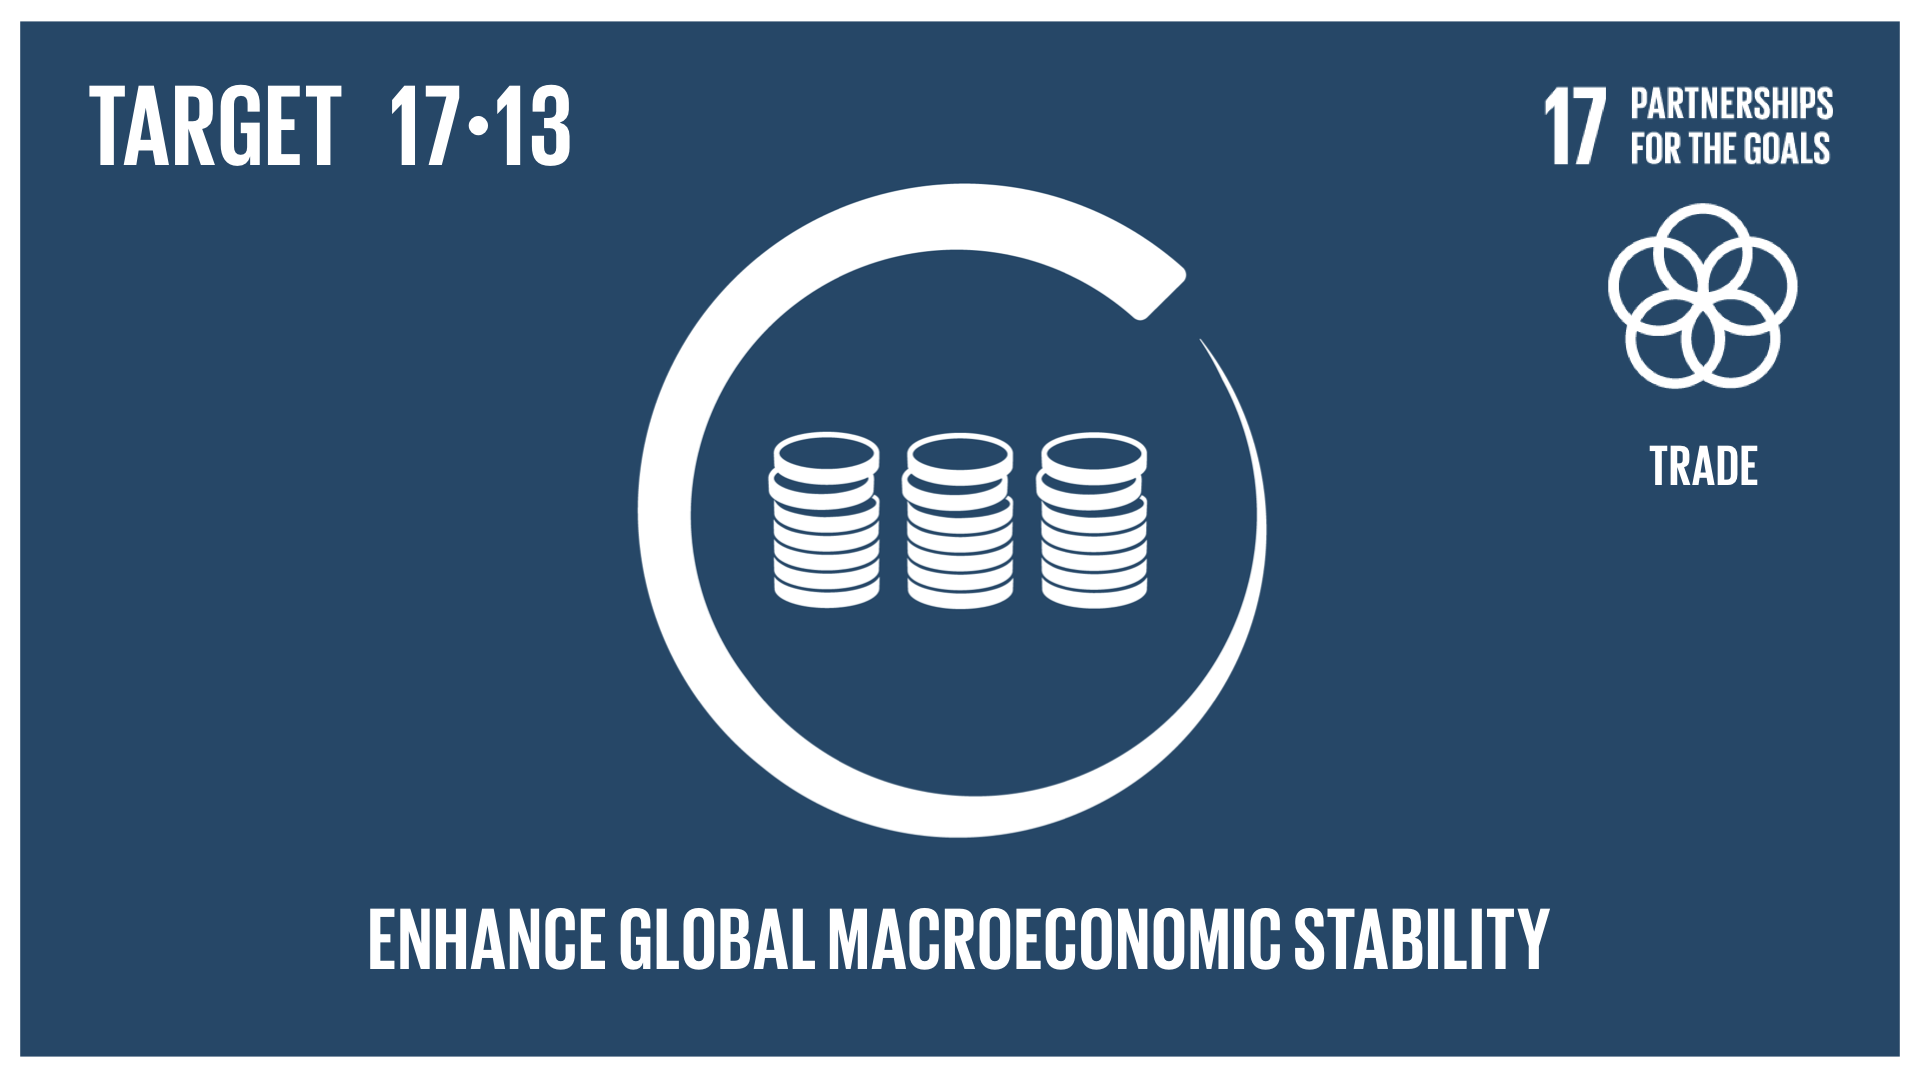 Graphic displaying the enhancement of global macroeconomic stability